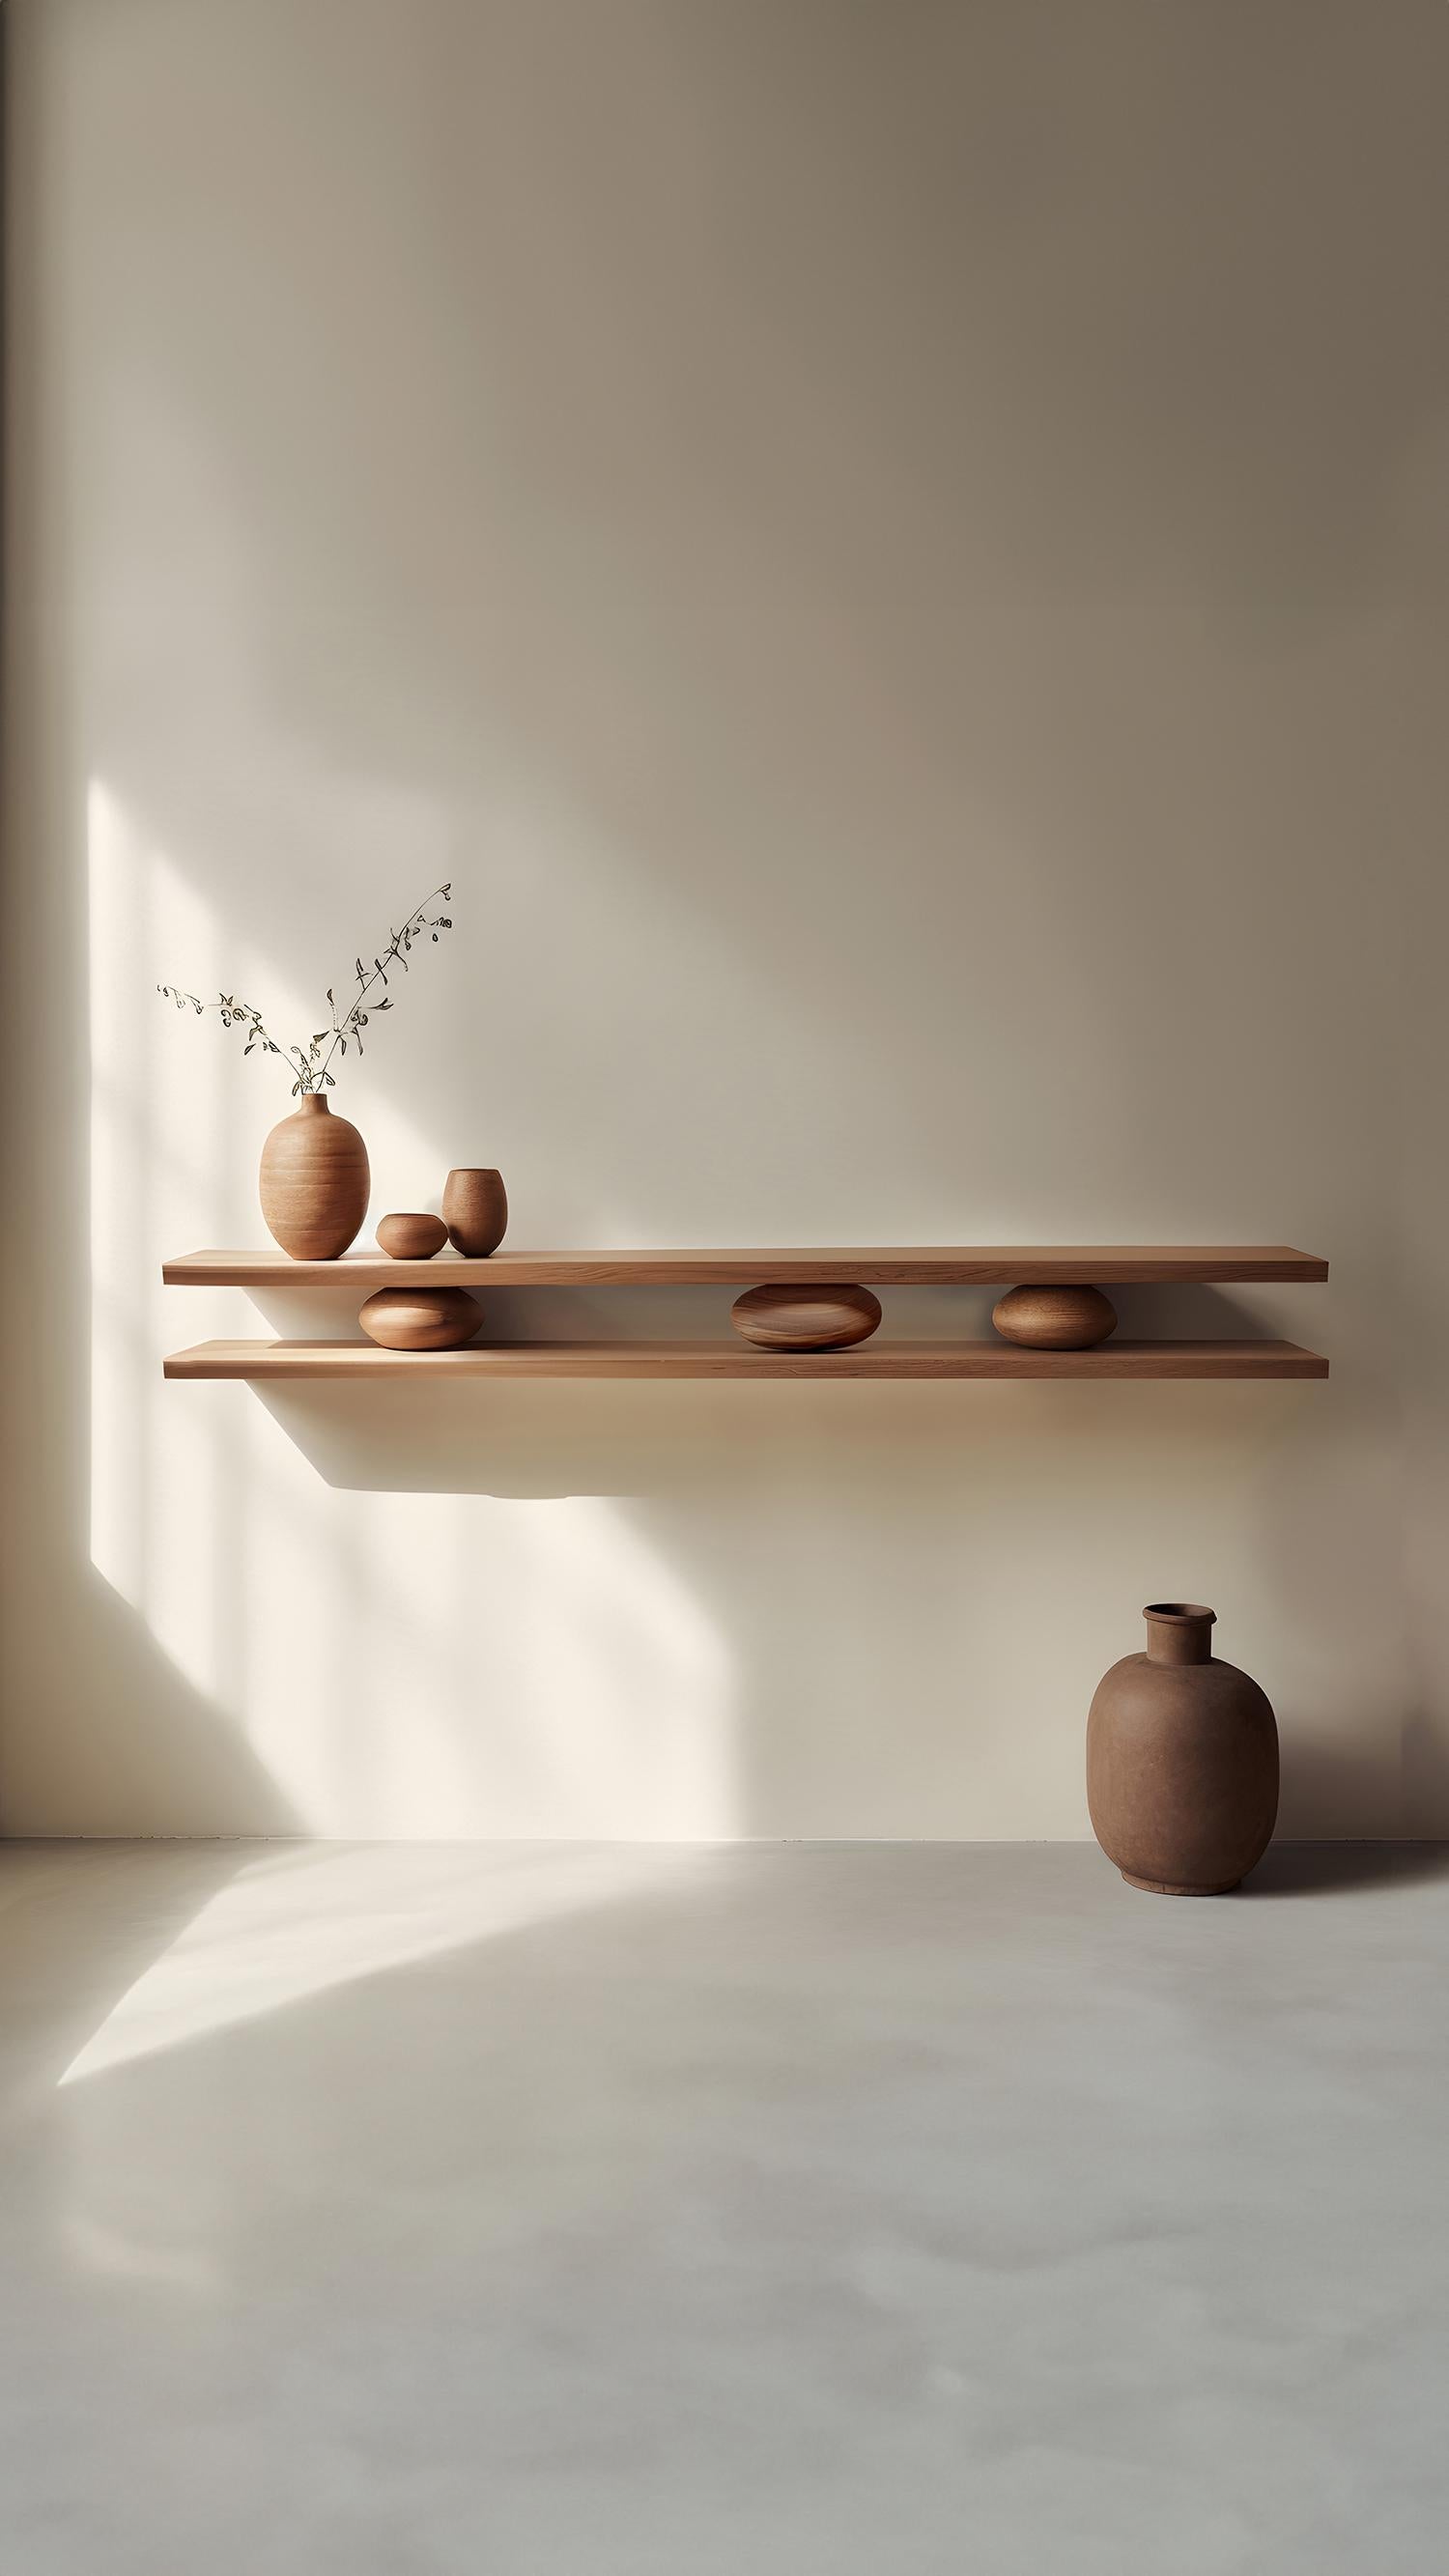 Veneer 2 Large Floating Shelves with 3 Sculptural Wooden Pebble Sereno by Joel Escalona For Sale